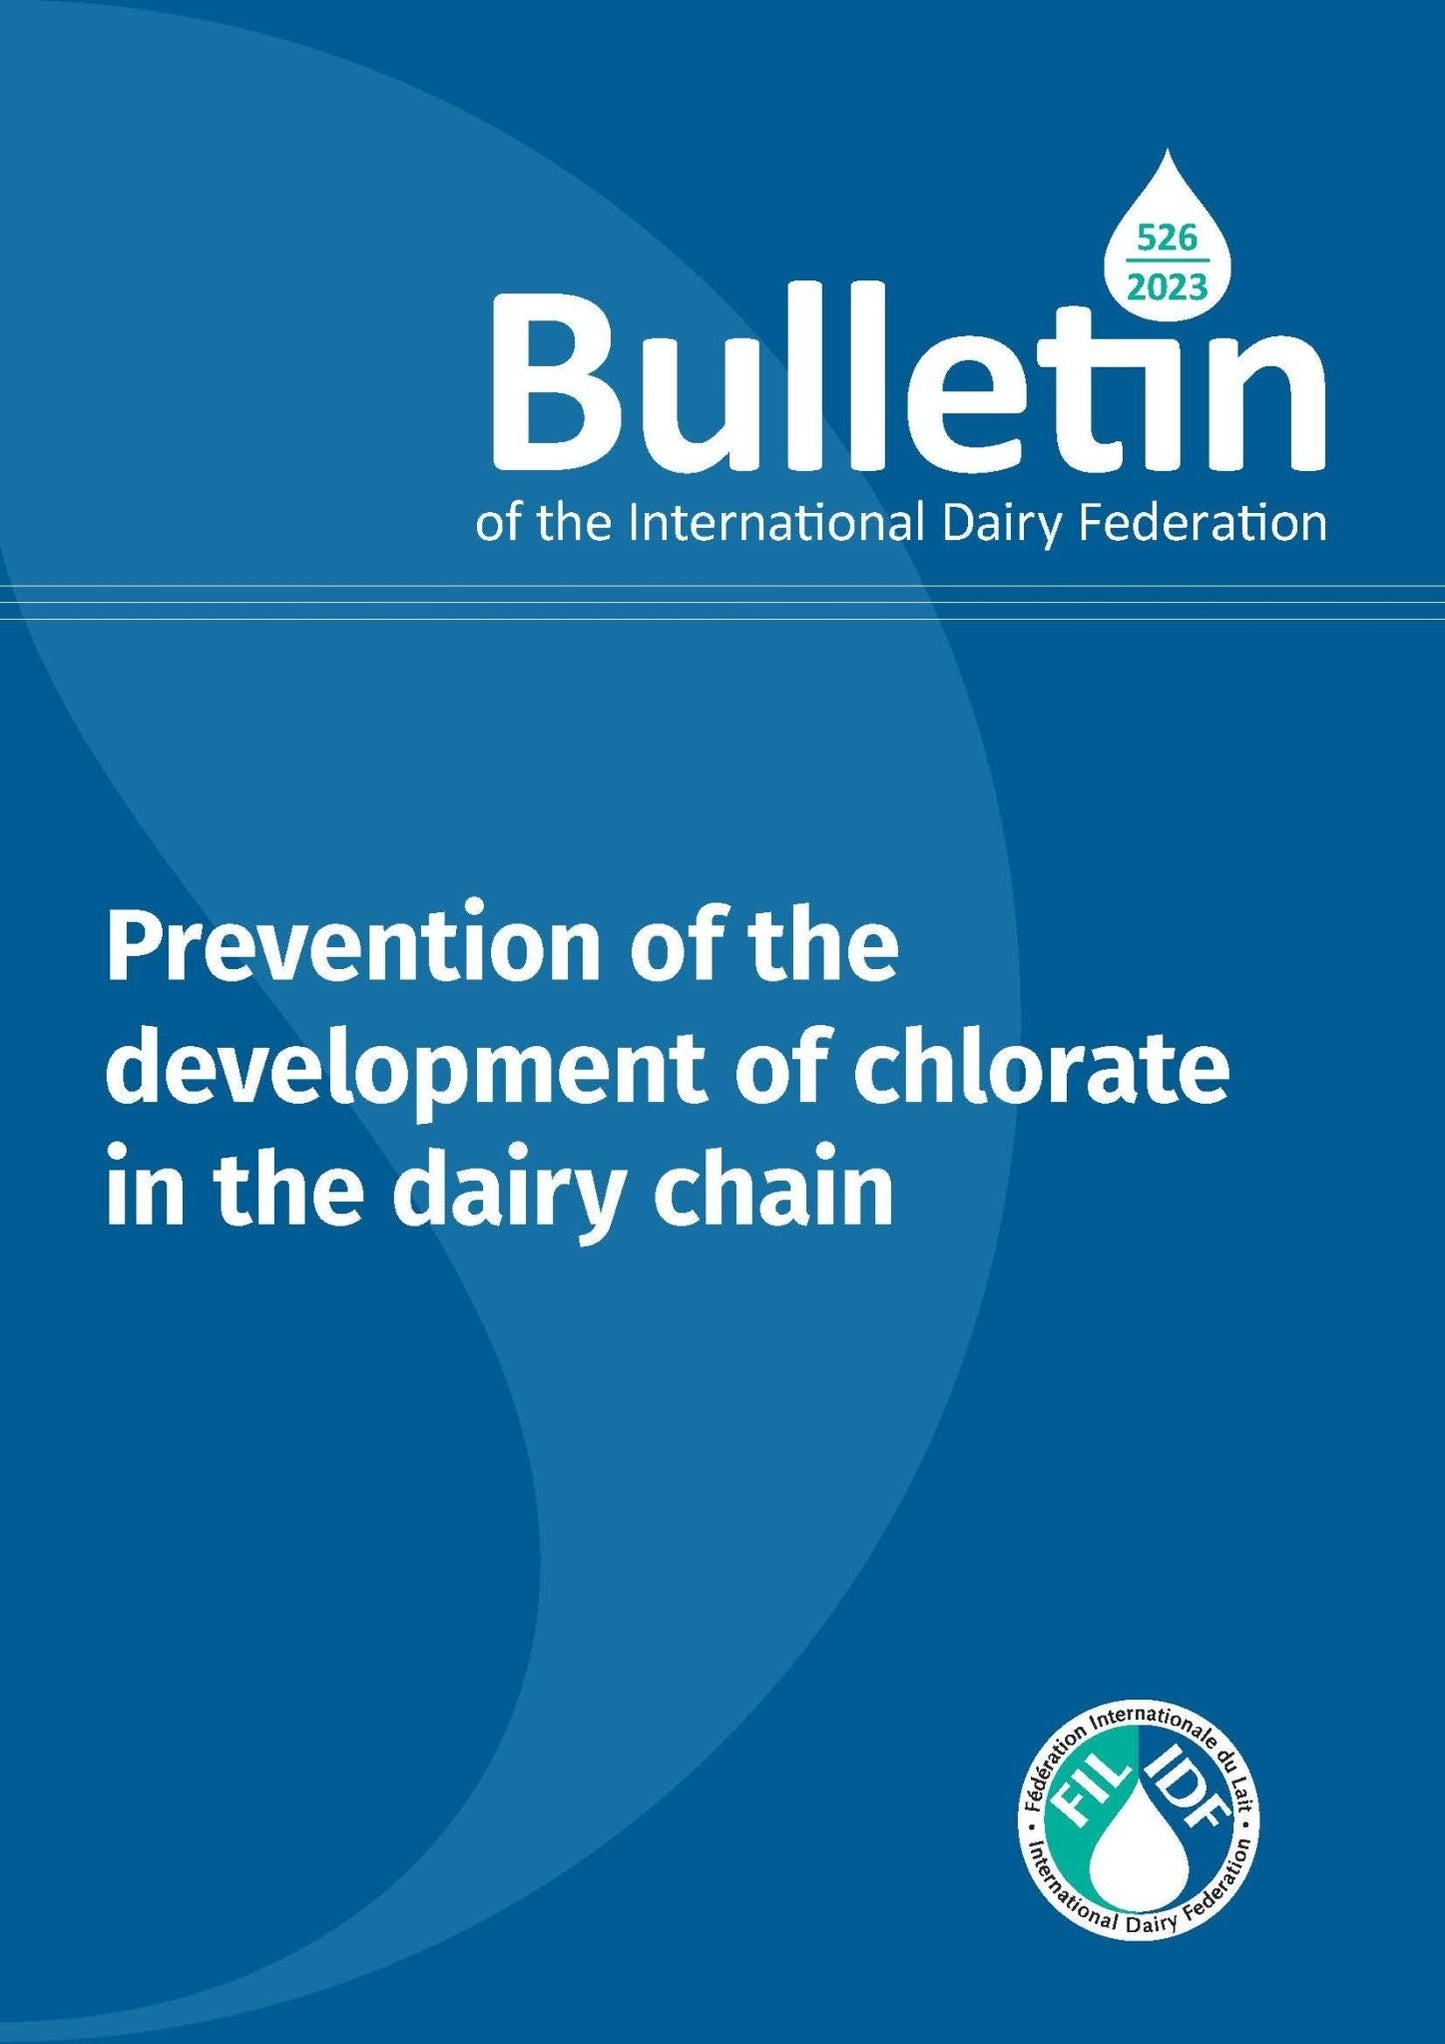 Bulletin of the IDF N° 526/2023: Prevention of the development of chlorate in the dairy chain - FIL-IDF